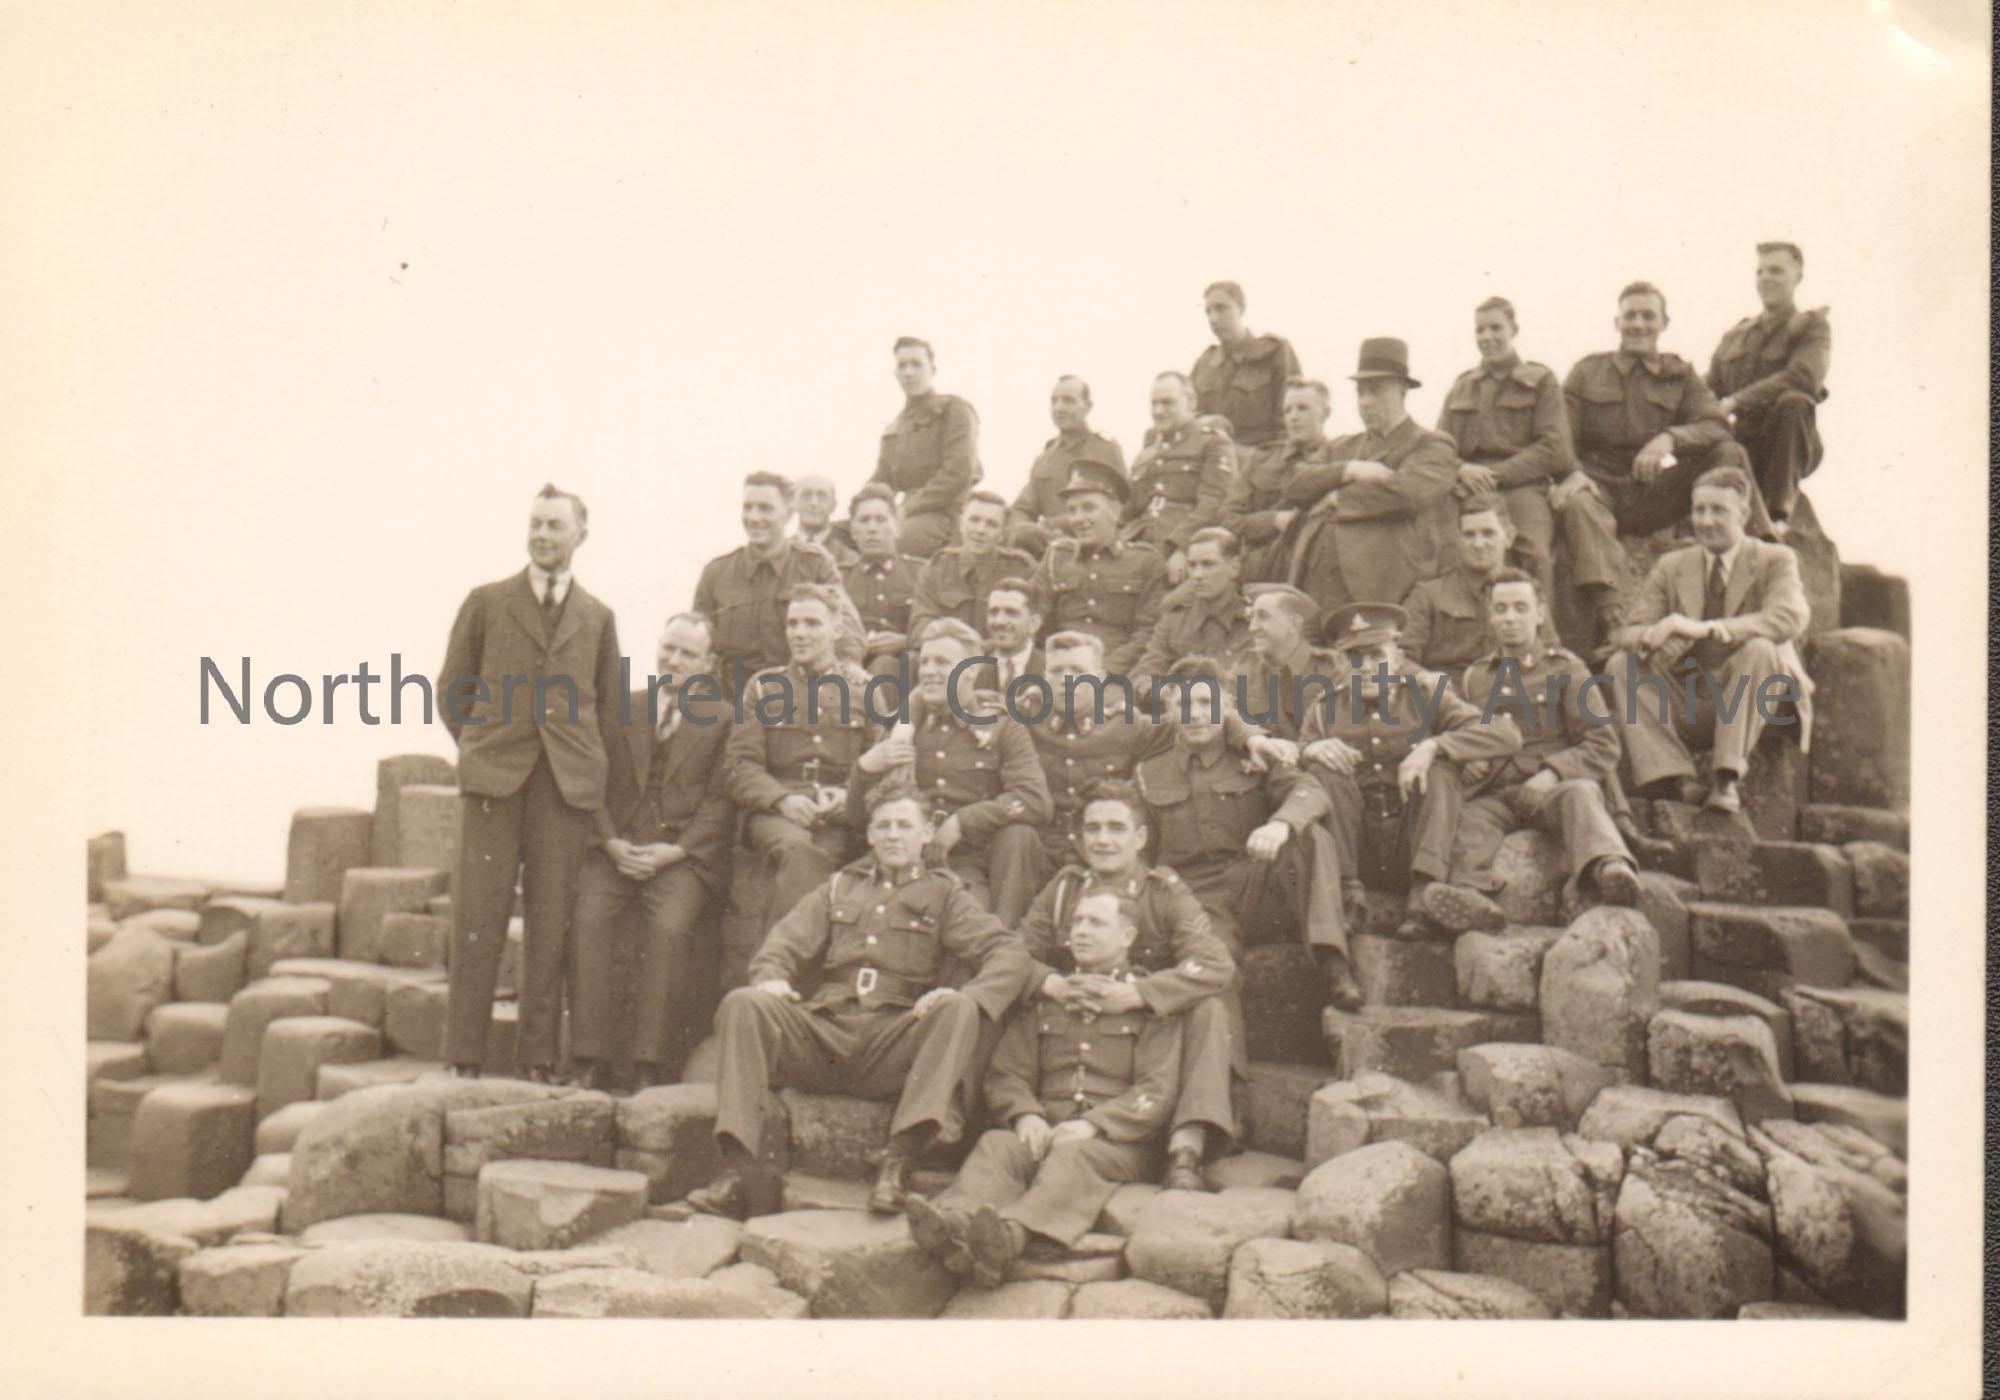 Black and white photograph of a group of soldiers at the Giant’s Causeway